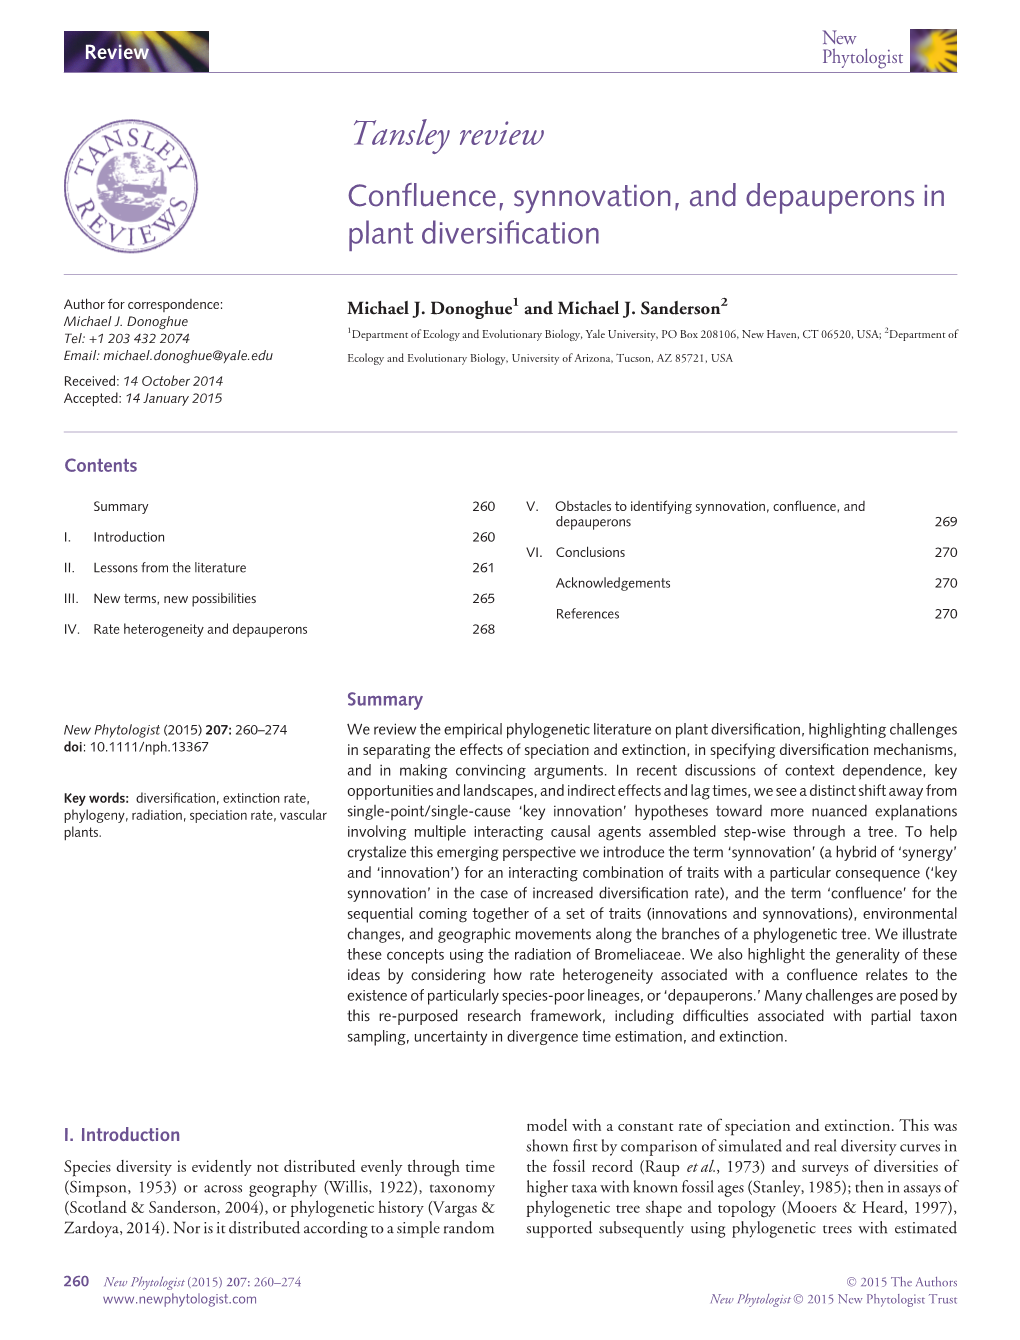 Confluence, Synnovation, and Depauperons in Plant Diversification